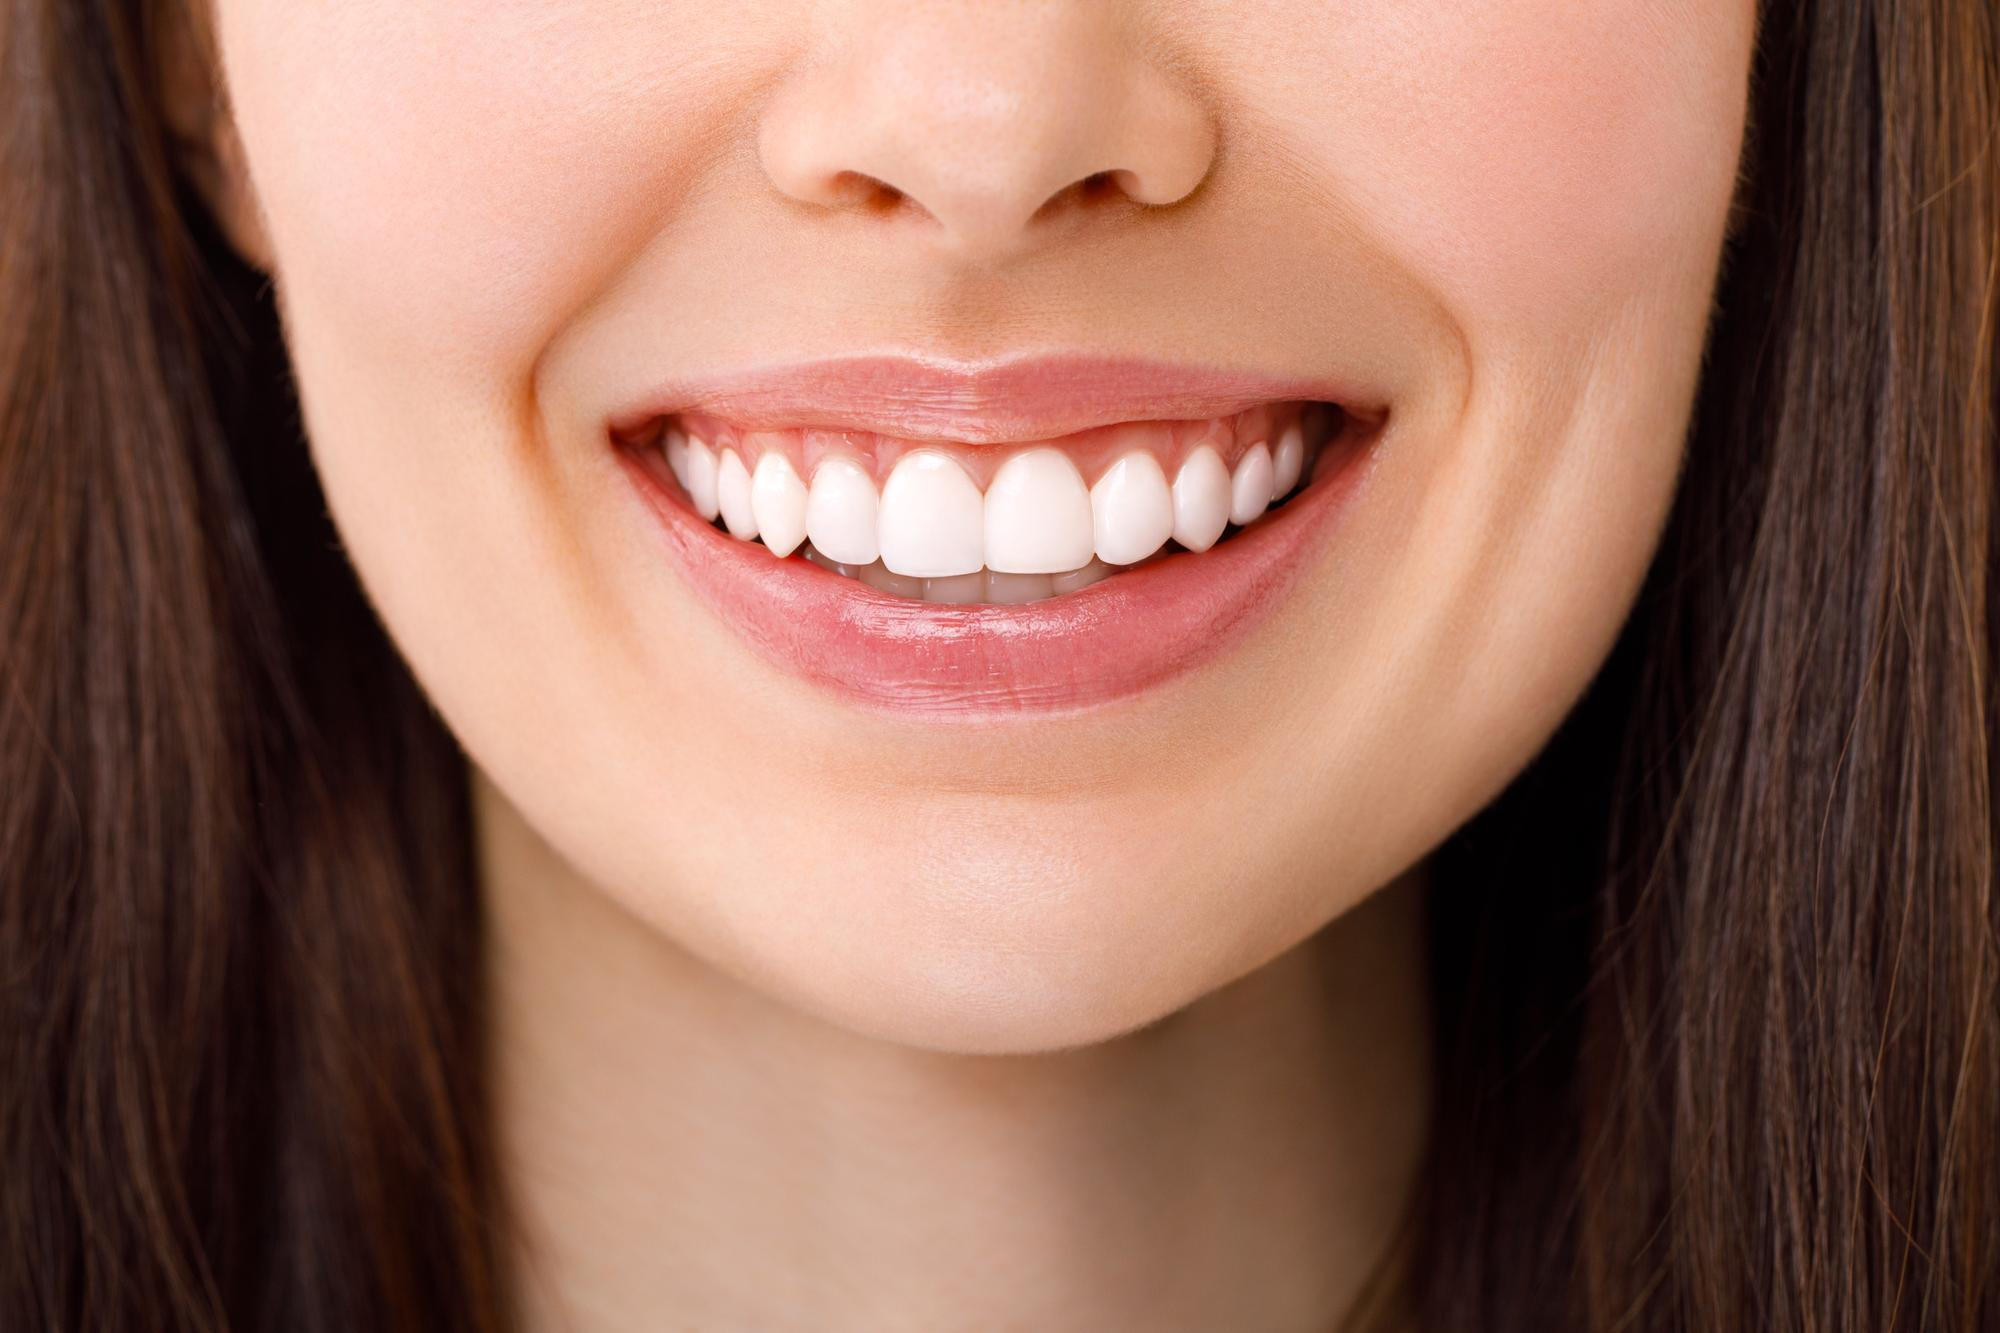 An illustration of a happy woman with dental veneers